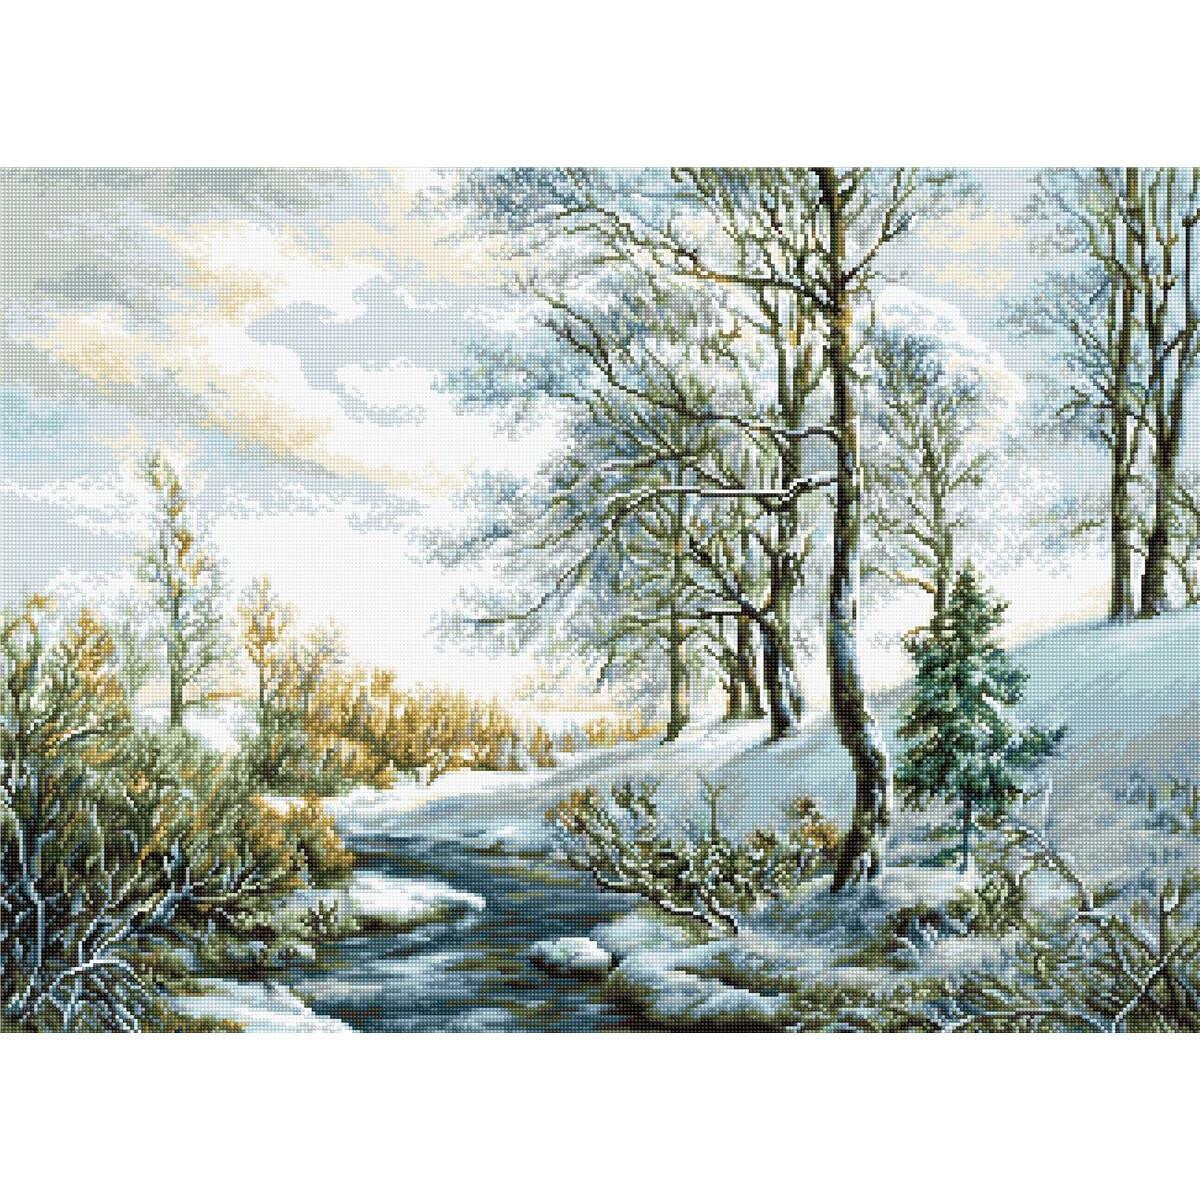 A tranquil winter landscape evokes the charm of a Luca-s...